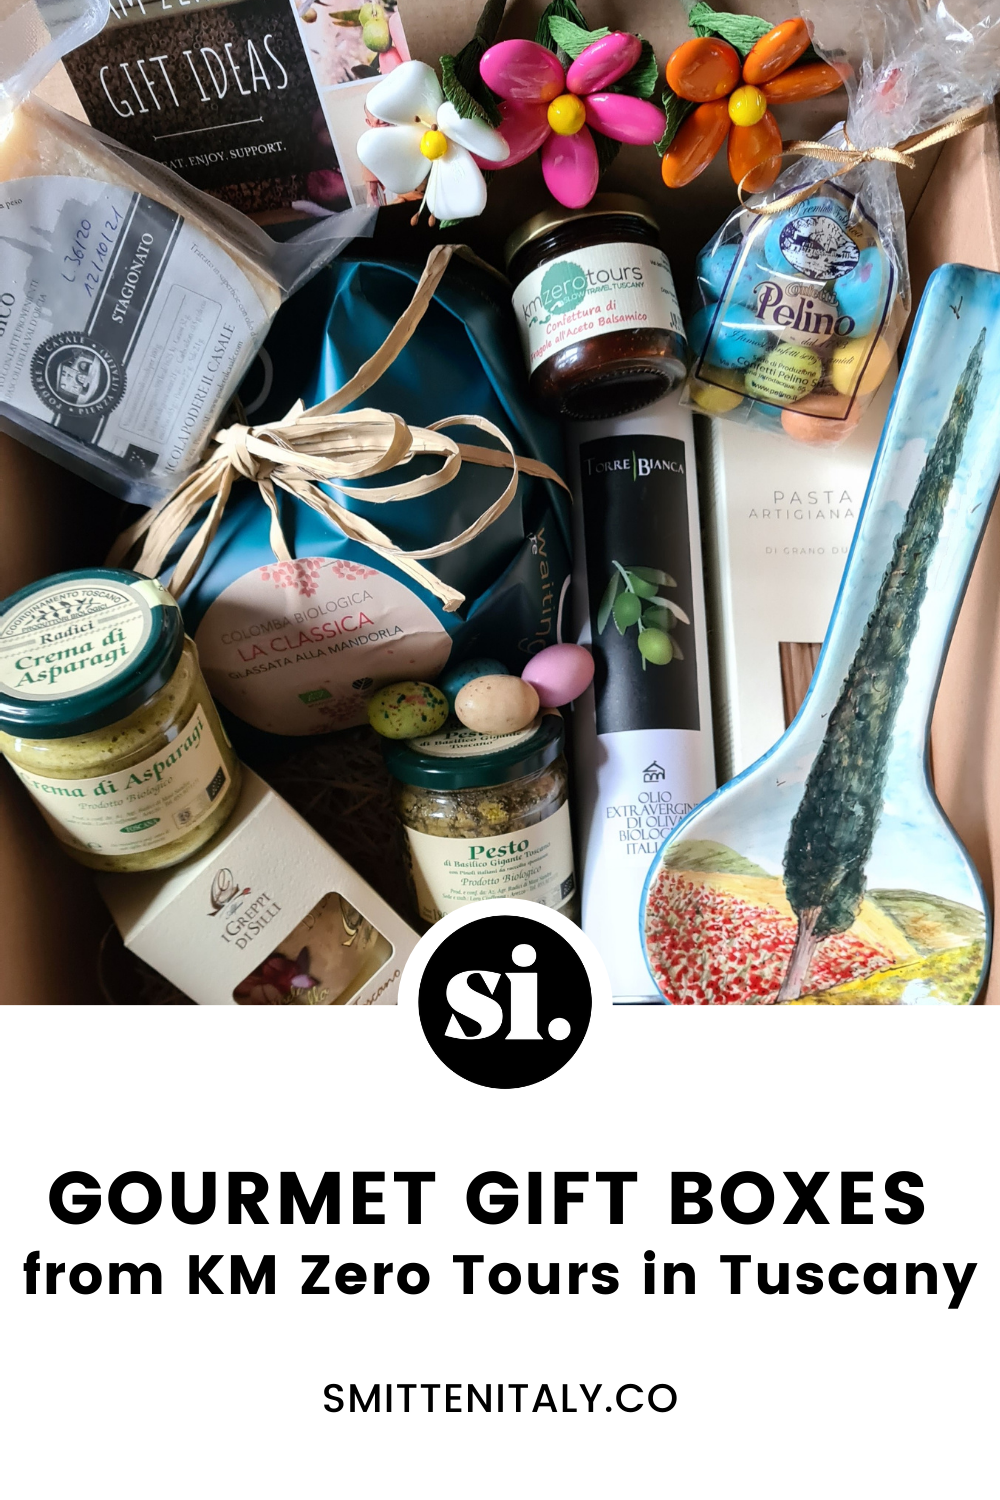 My experience: KM Zero Gourmet Gift Boxes from Tuscany 1